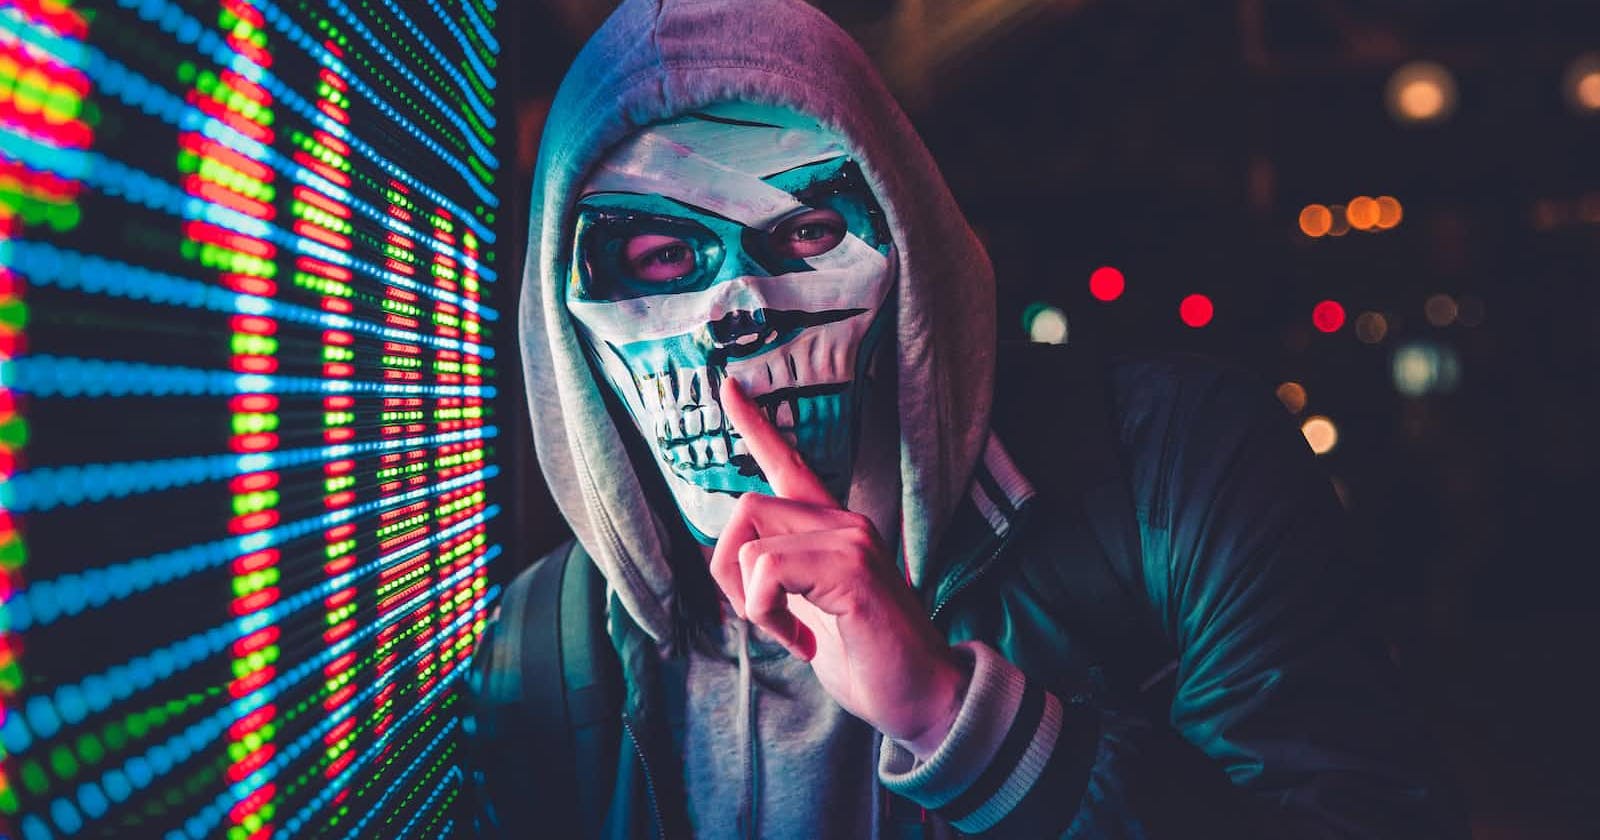 Anonymous Sudan Discusses Their Actions, Telegram Targeting, and the Lack of Notable Impact